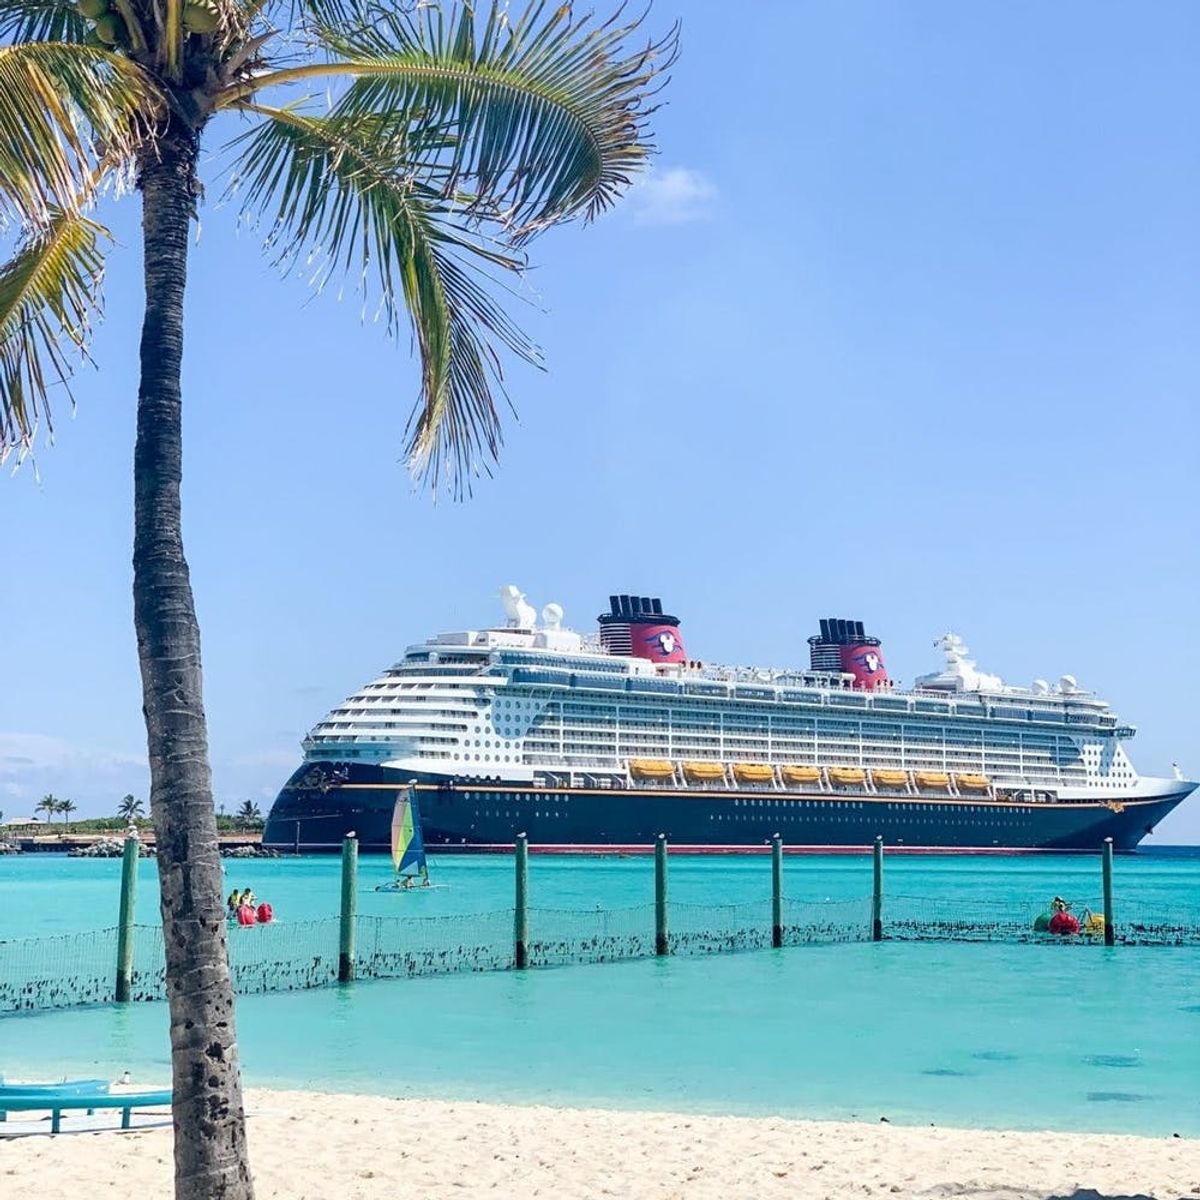 15 Reasons Why a Disney Cruise is Perfect for Solo Travelers